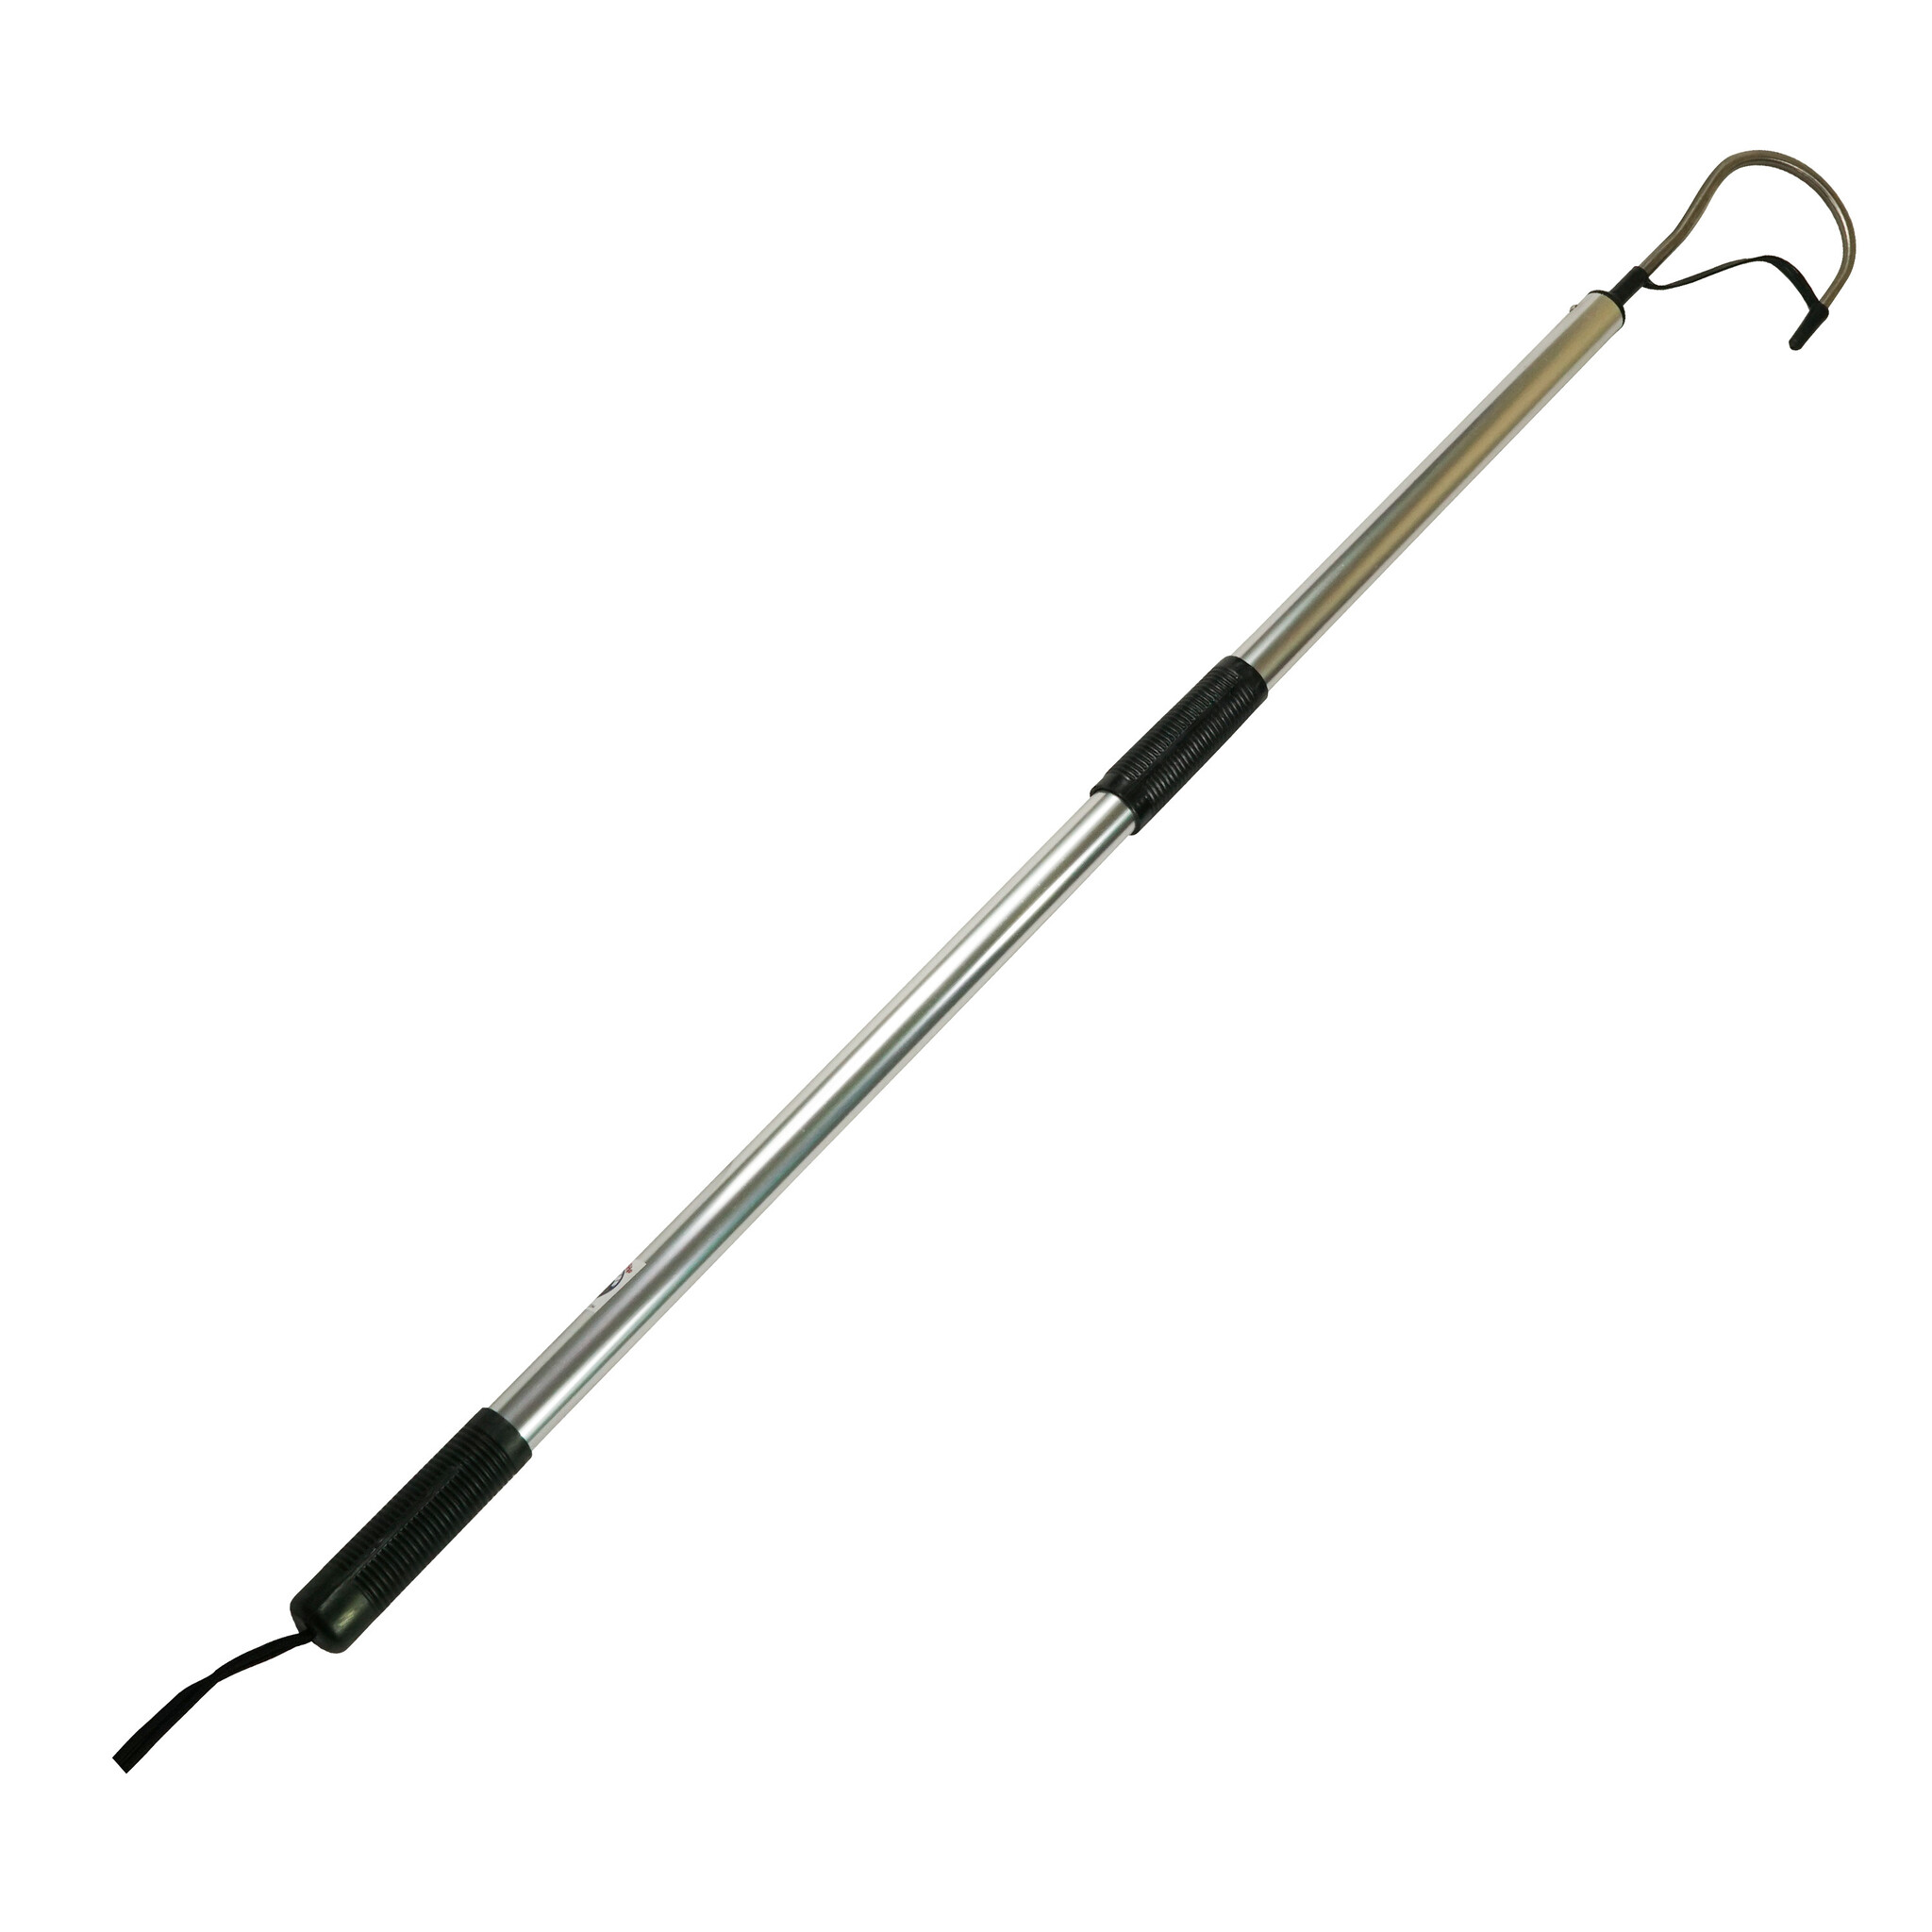 Lee Fisher Sports Gaff 2 Hook x 72L Stainless